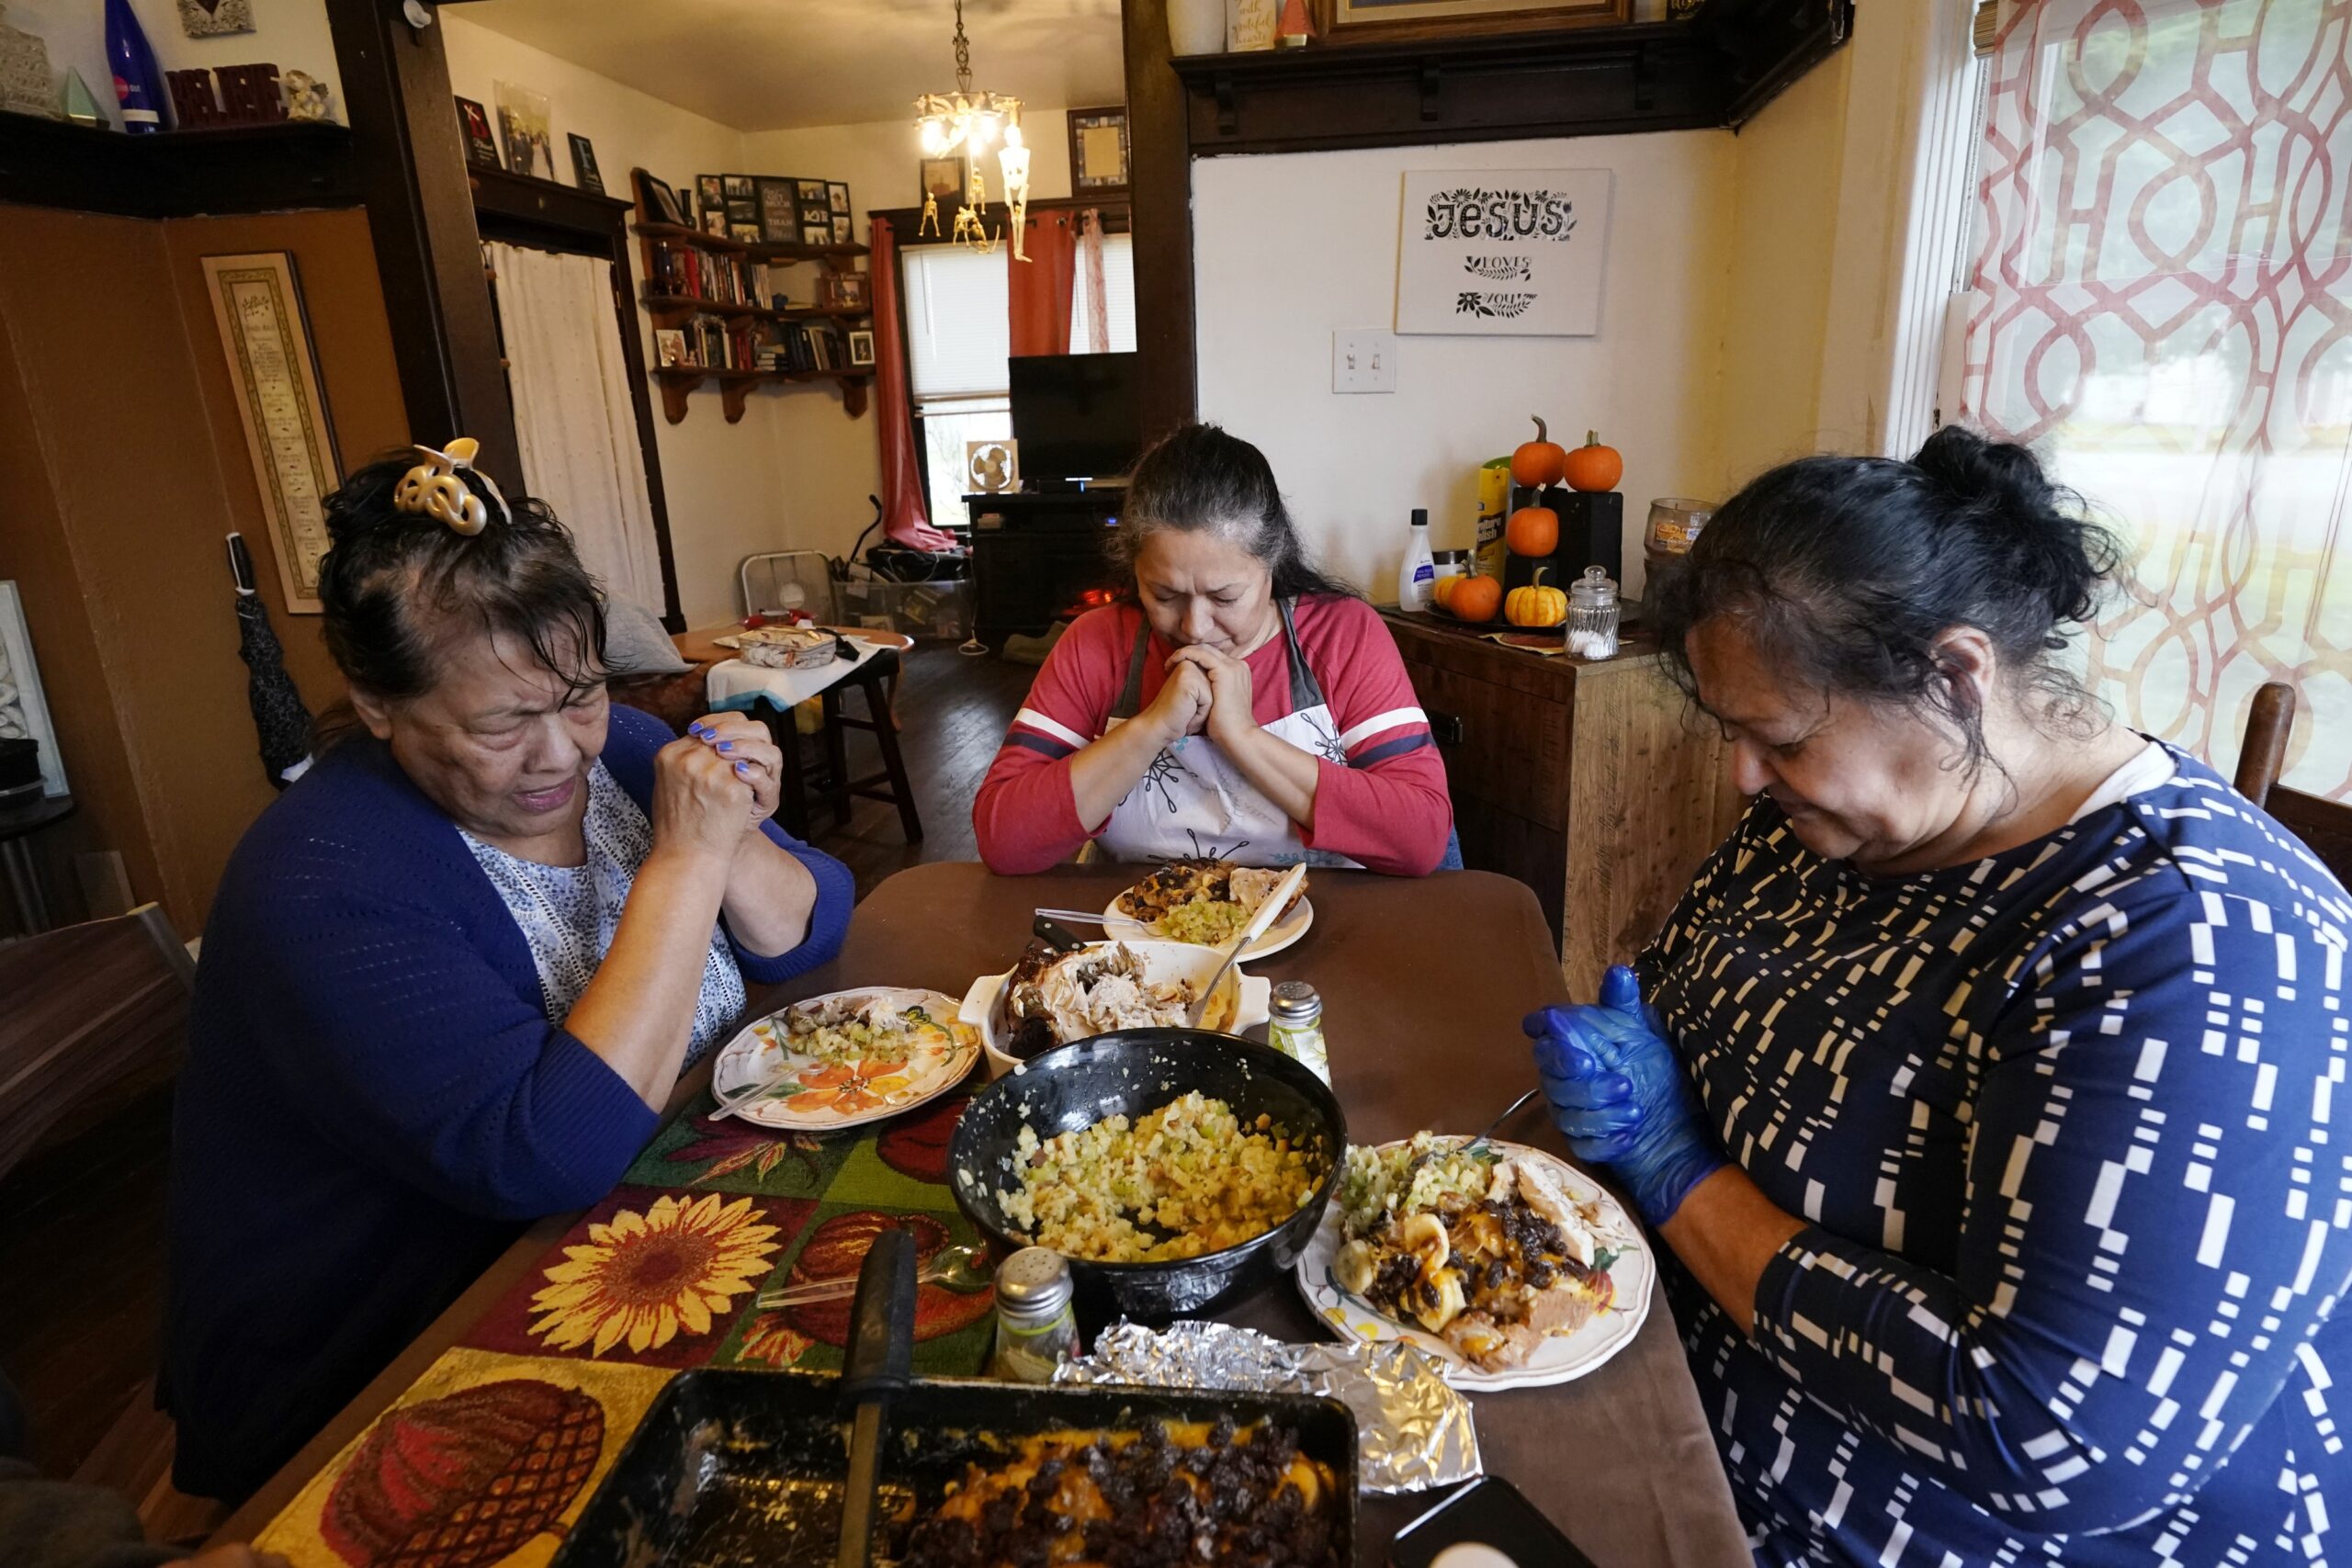 A family celebrates a meal ahead of Thanksgiving